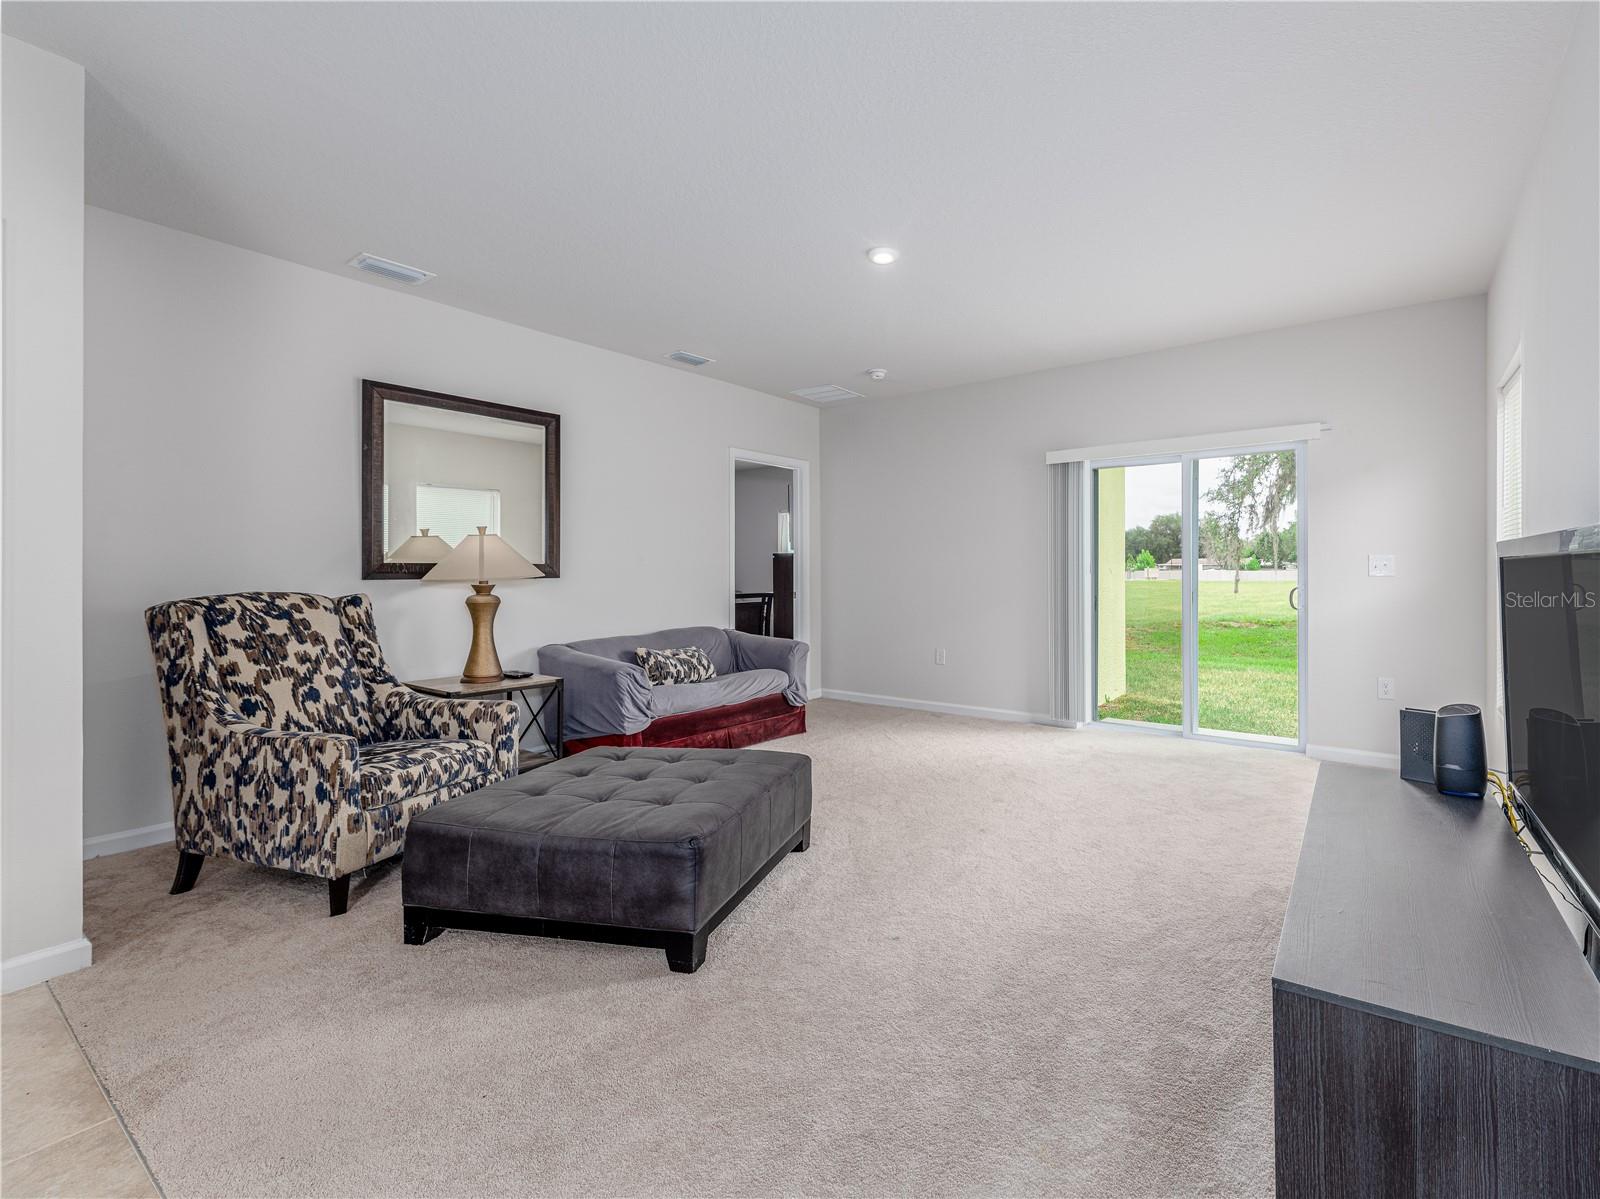 Your spacious living room with sliders leading to green space beyond your back yard.